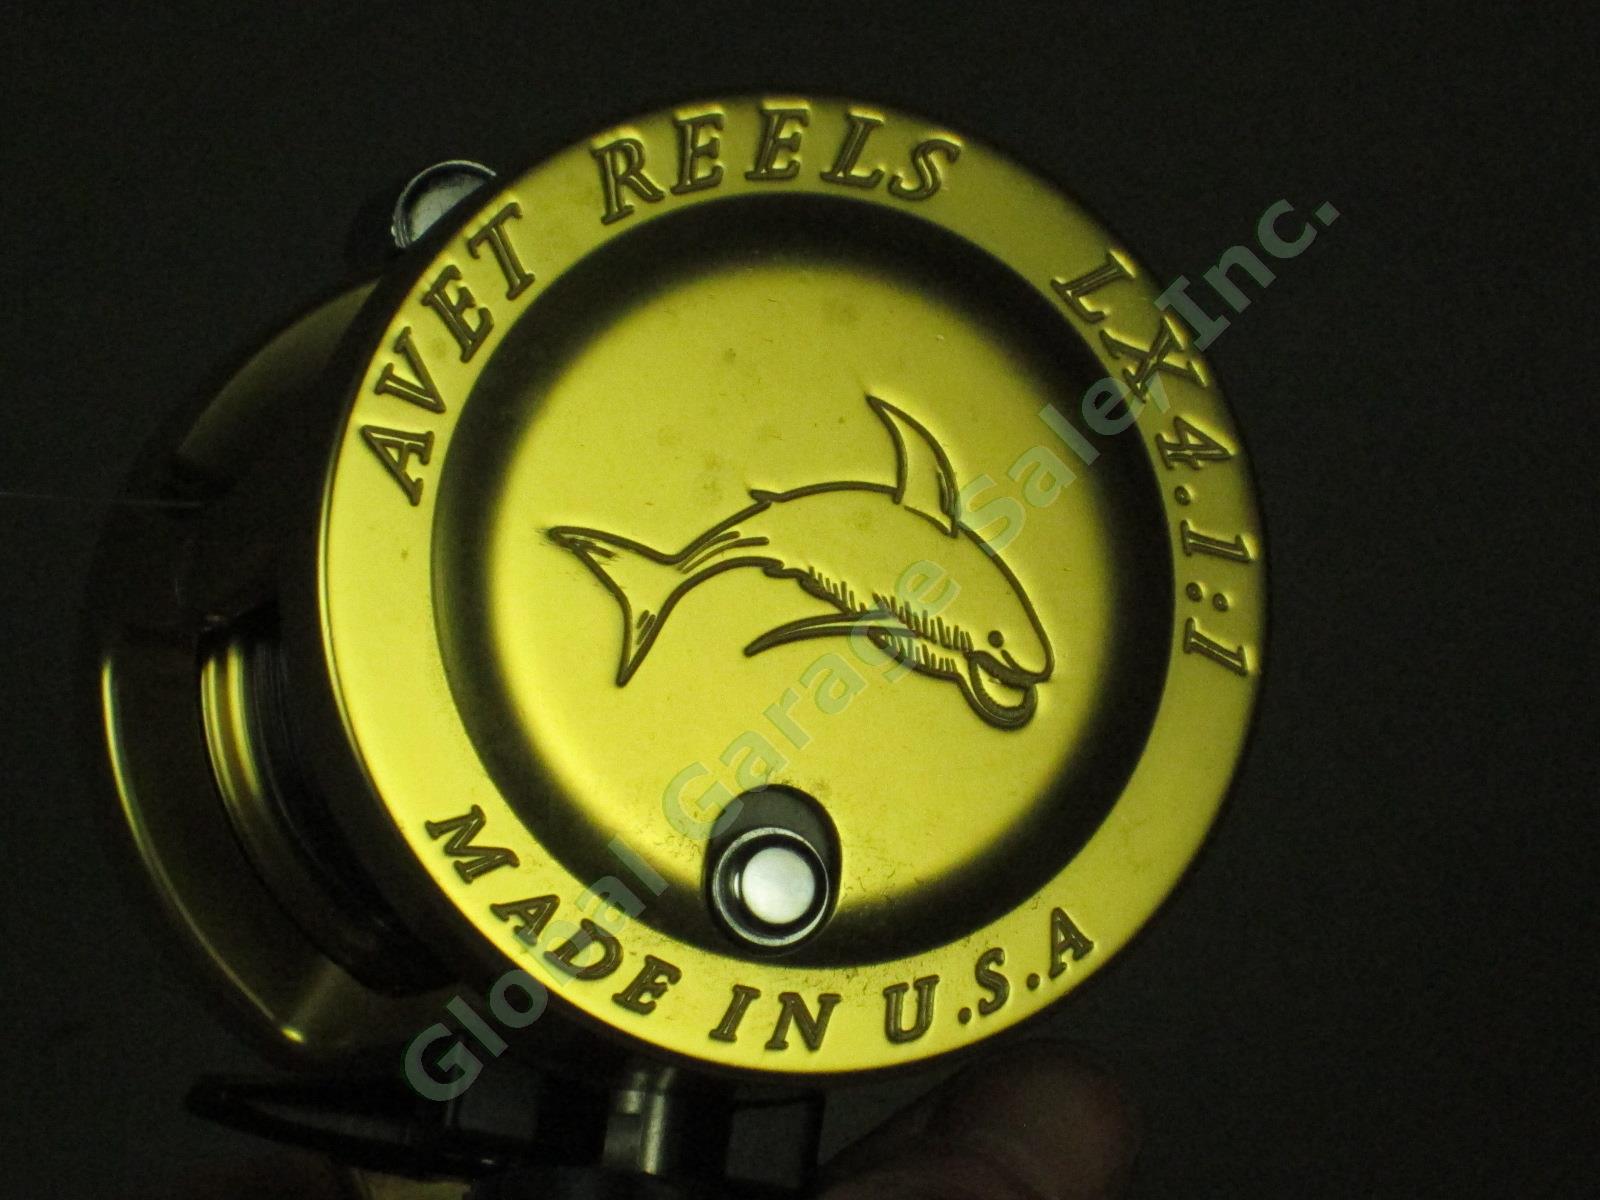 Avet LX 4.1.1 Lever Drag Gold Fishing Reel Stainless Bearings USA Made EXC+ Cond 4